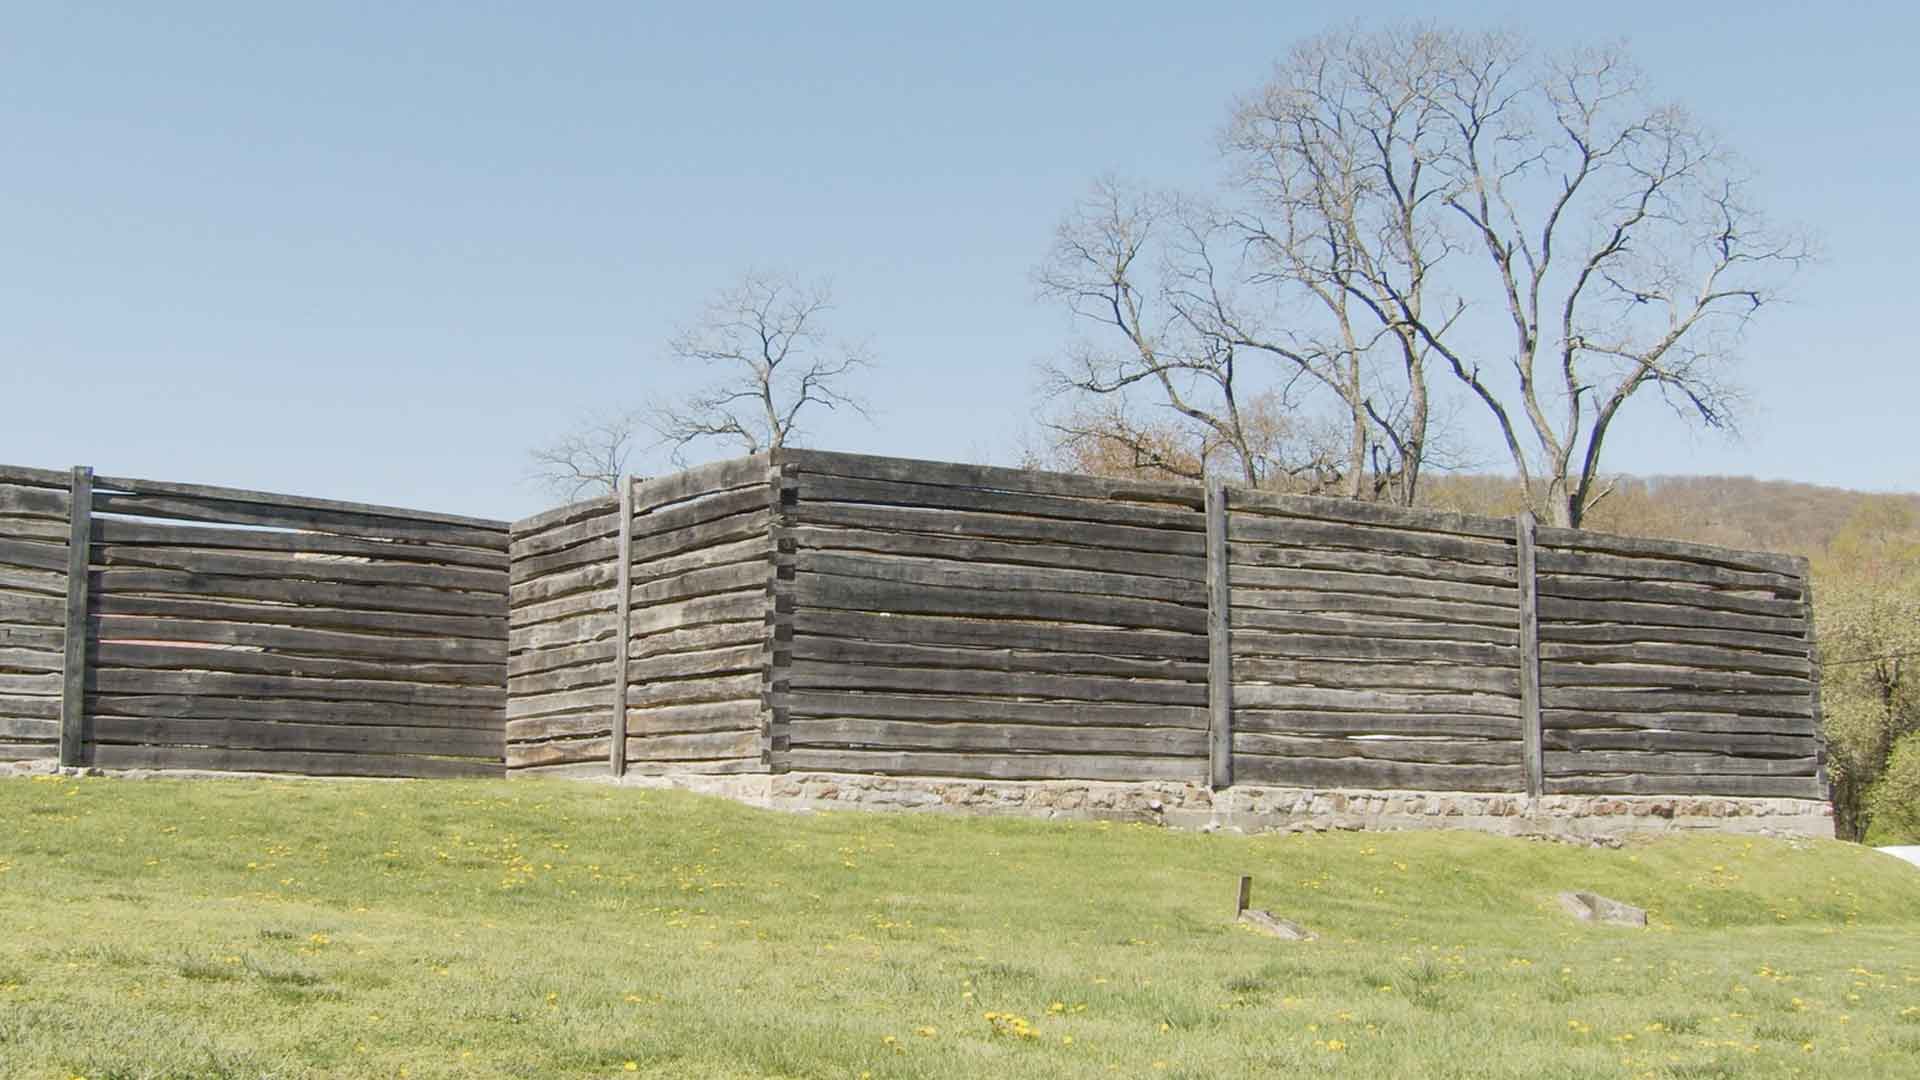 horizontal log structure of Fort Roberdeau